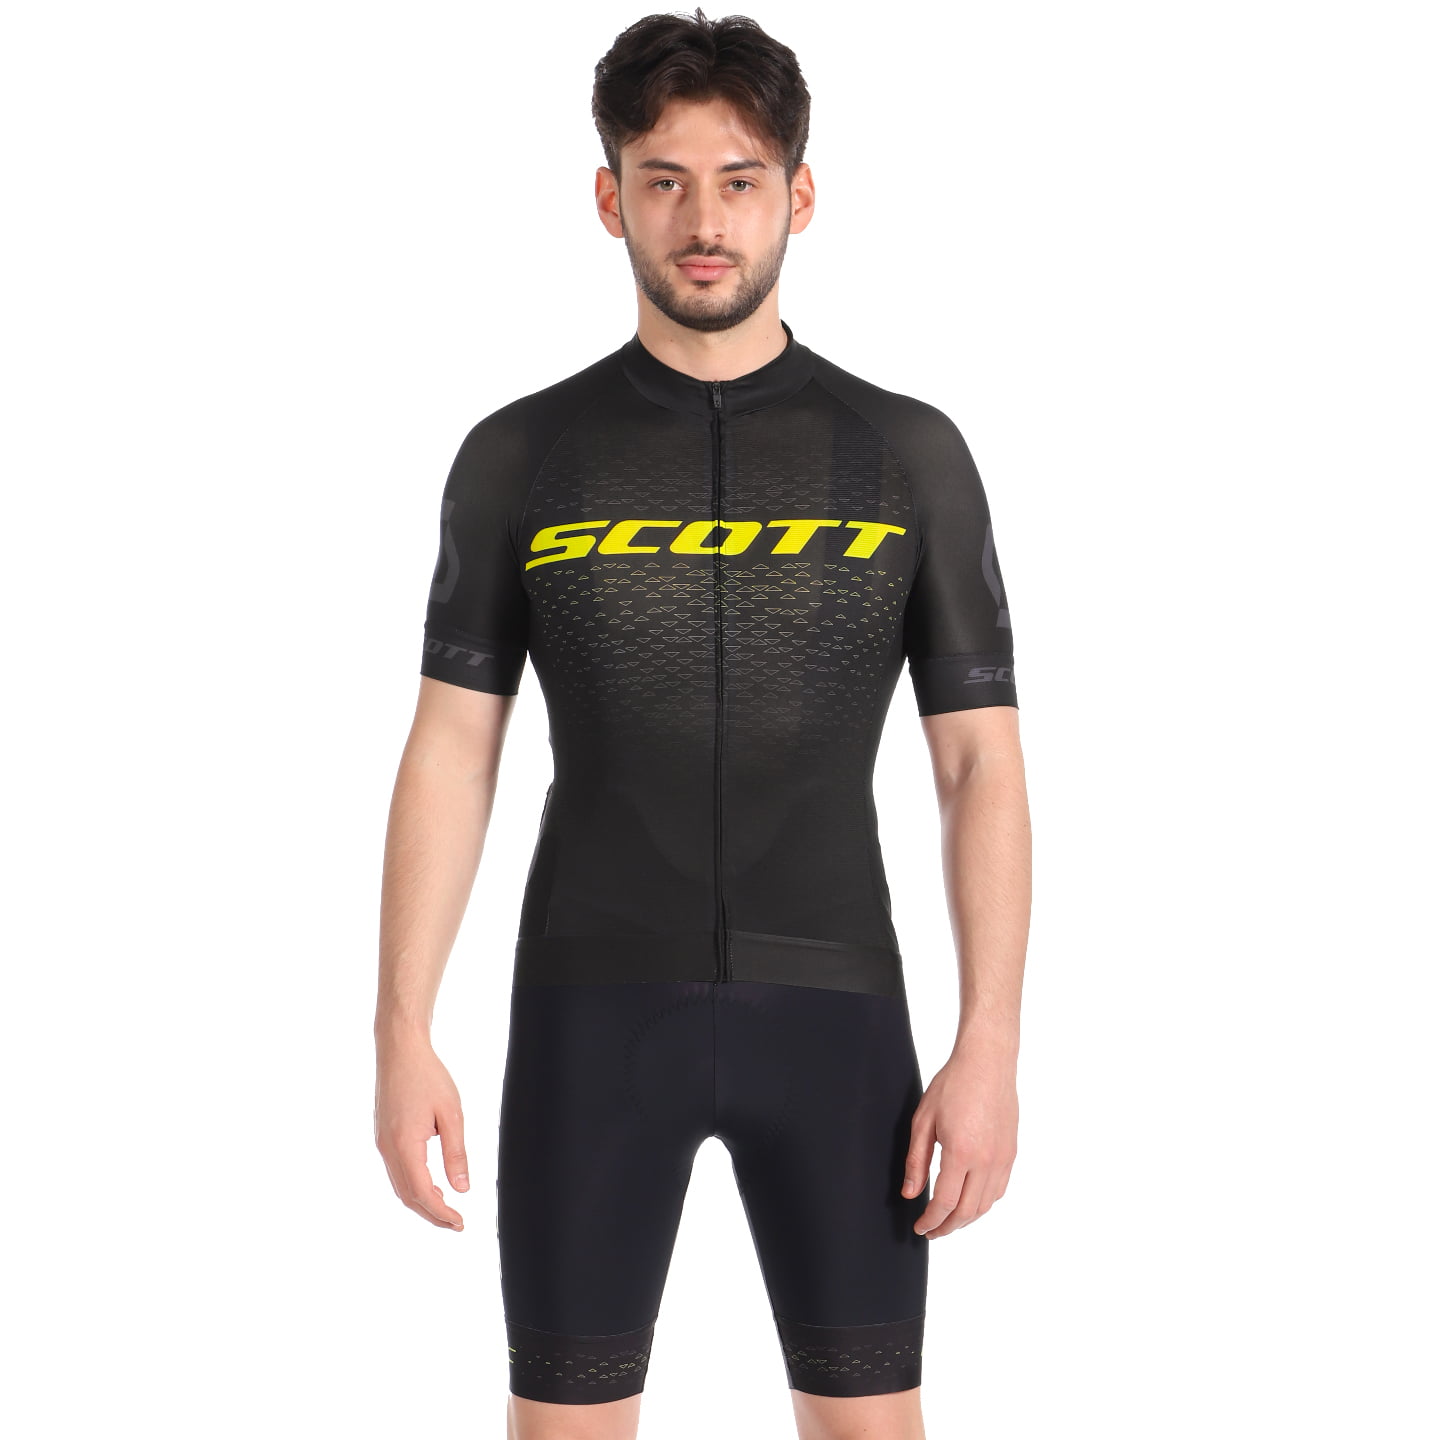 SCOTT RC Pro WC Edt. Set (cycling jersey + cycling shorts) Set (2 pieces), for men